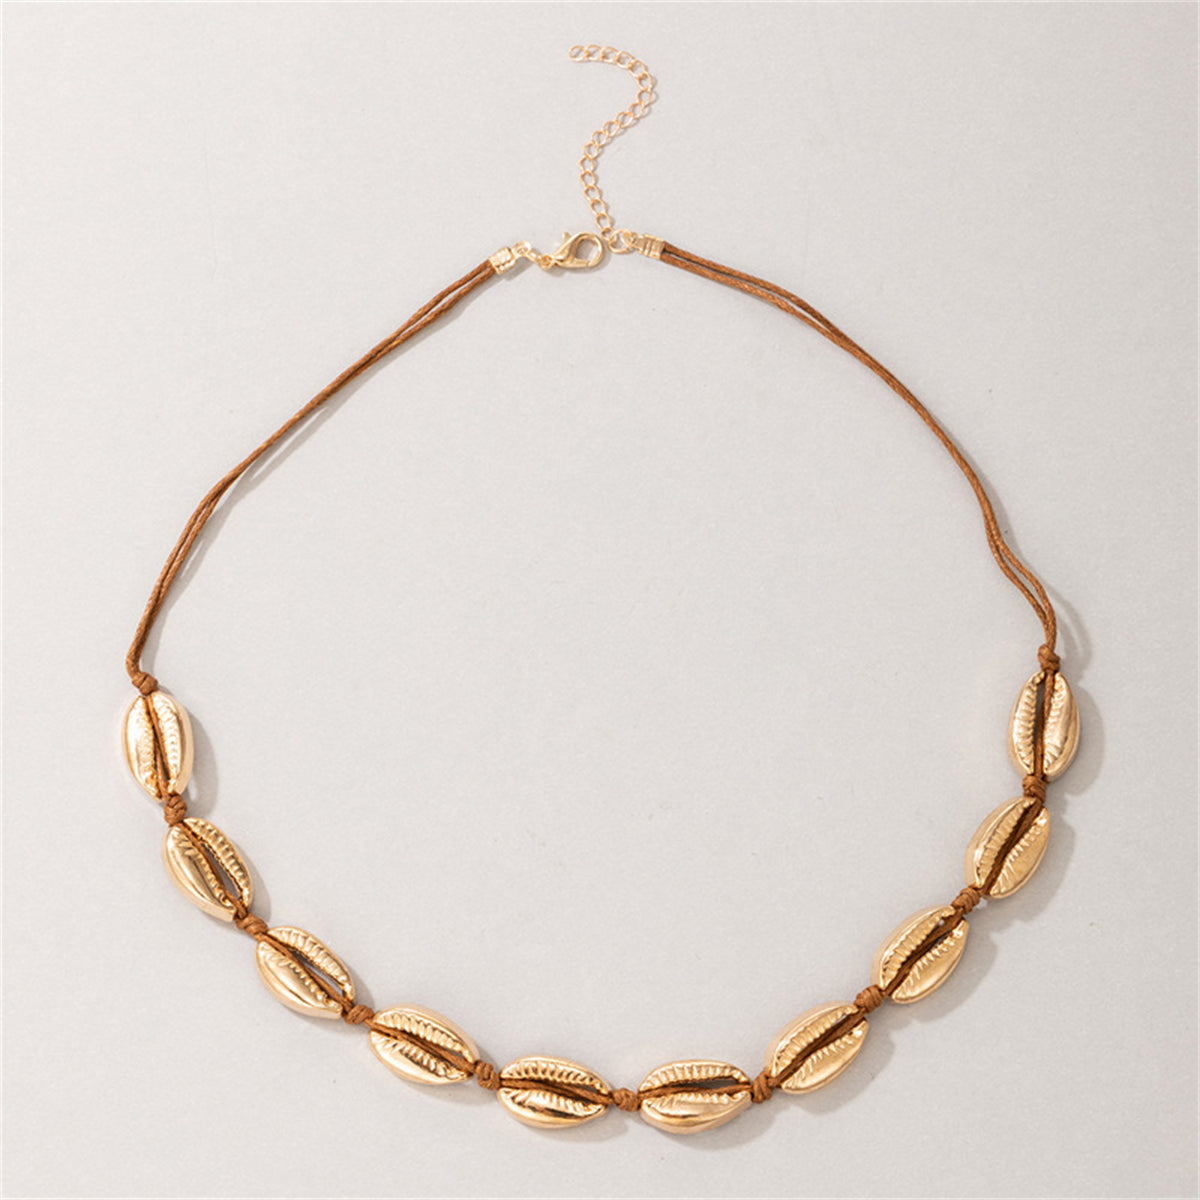 18K Gold-Plated Shell Station Necklace